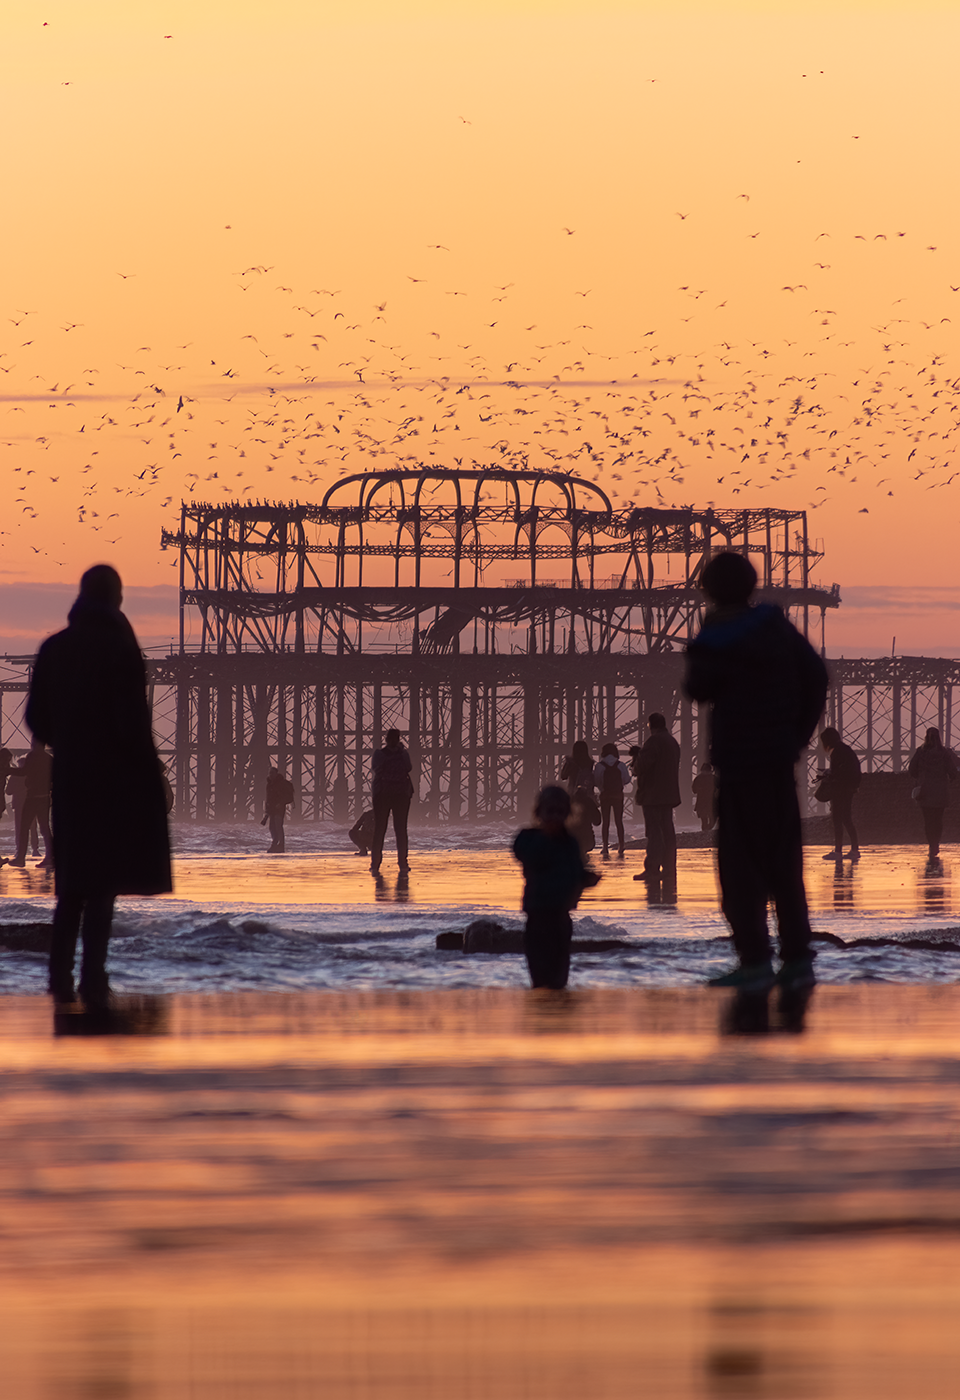 photographic print of Brighton's West Pier at sunset.